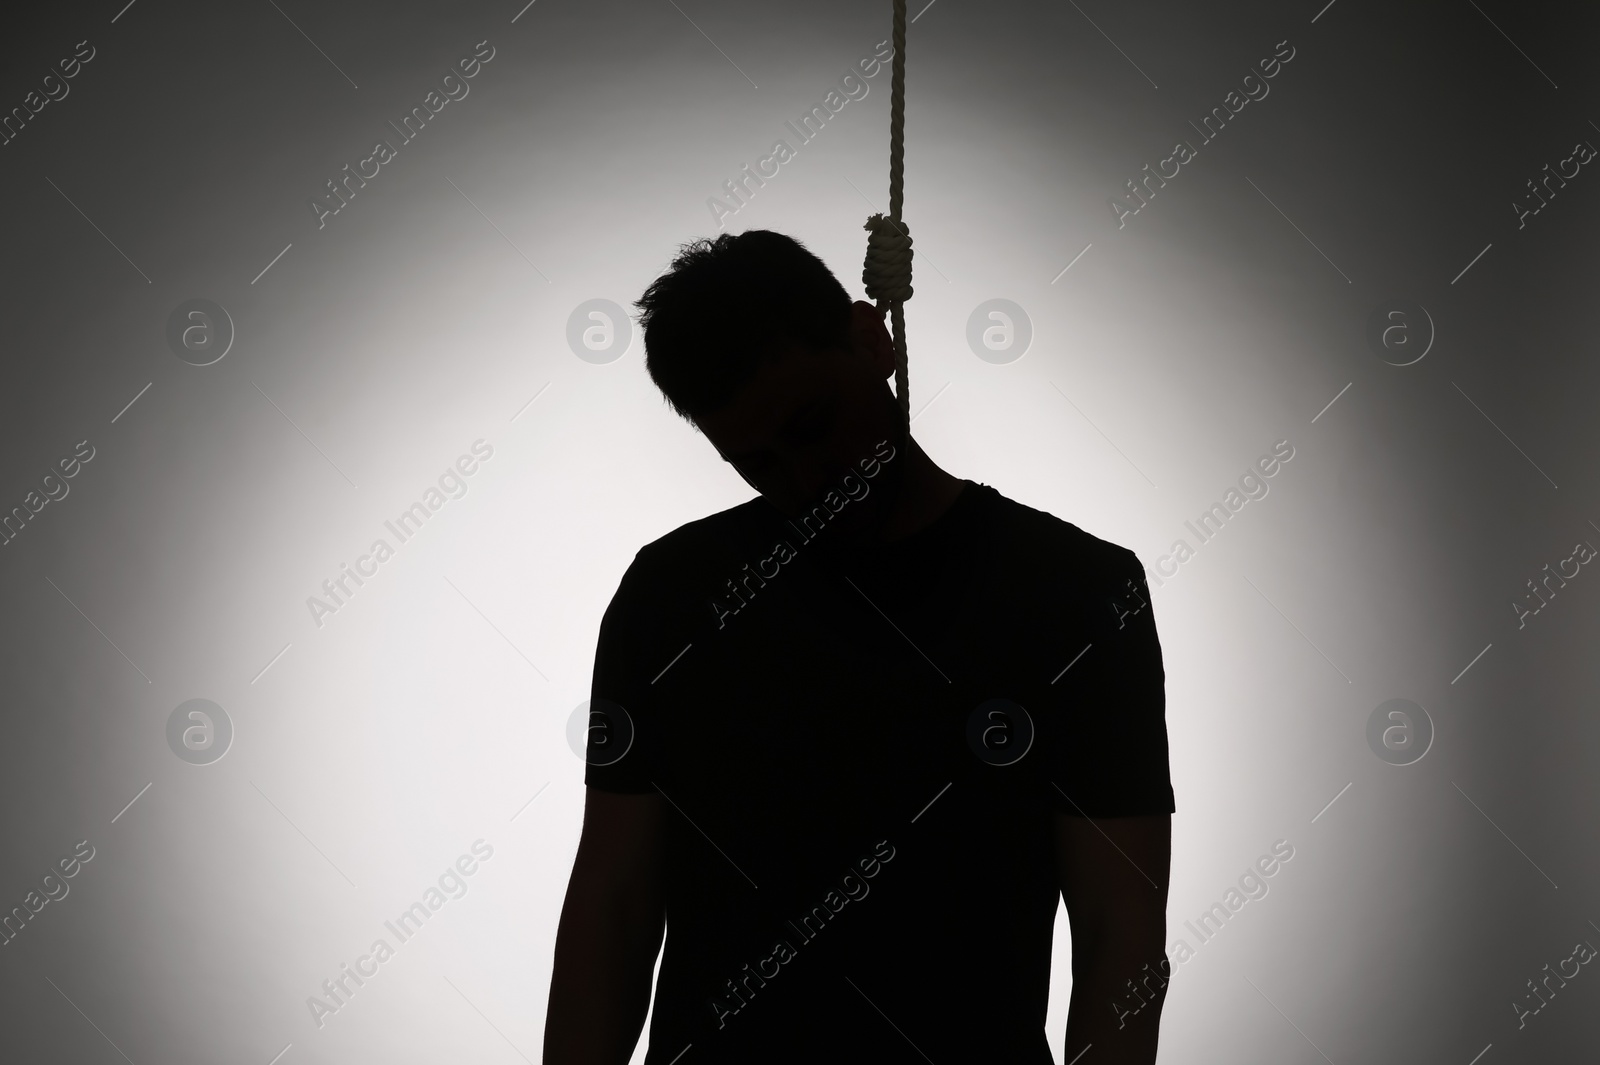 Photo of Silhouette of man with rope noose on neck against light background